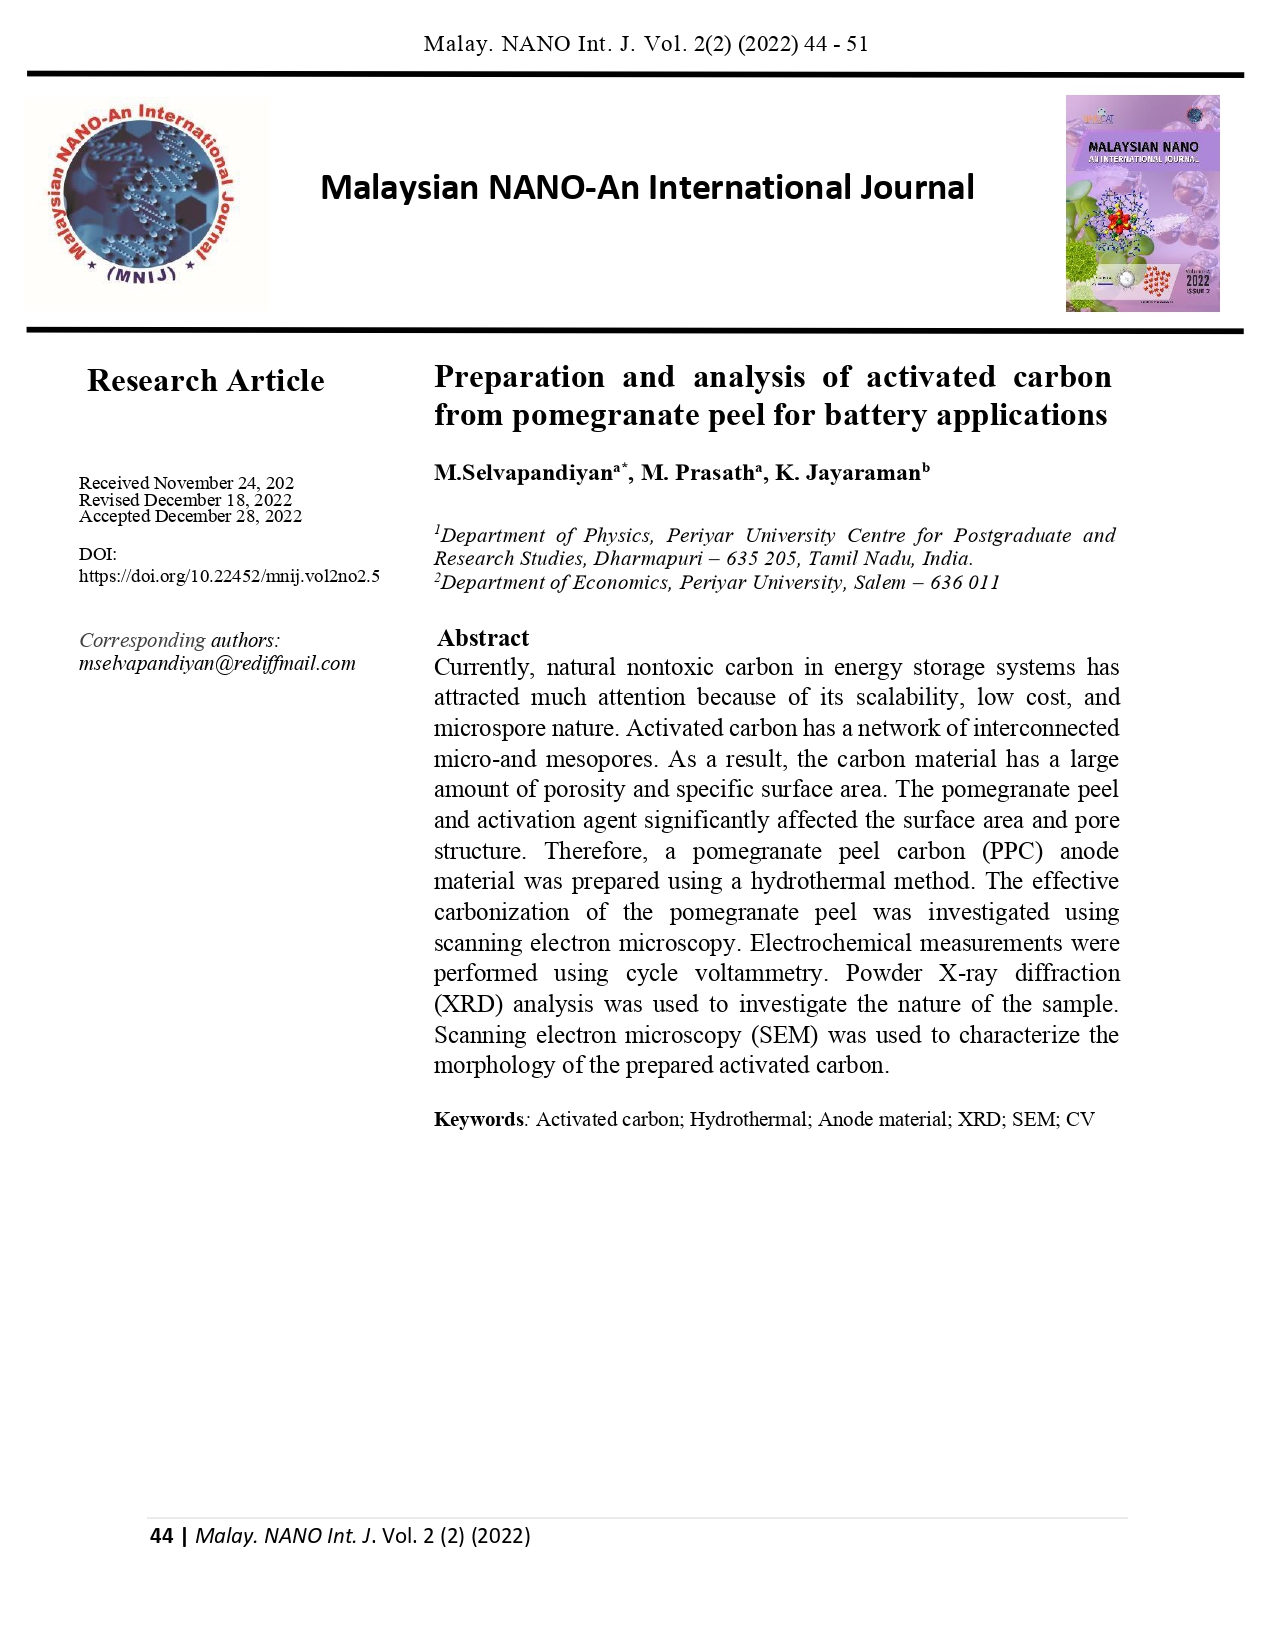 Preparation and analysis of activated carbon  from pomegranate peel for battery applications